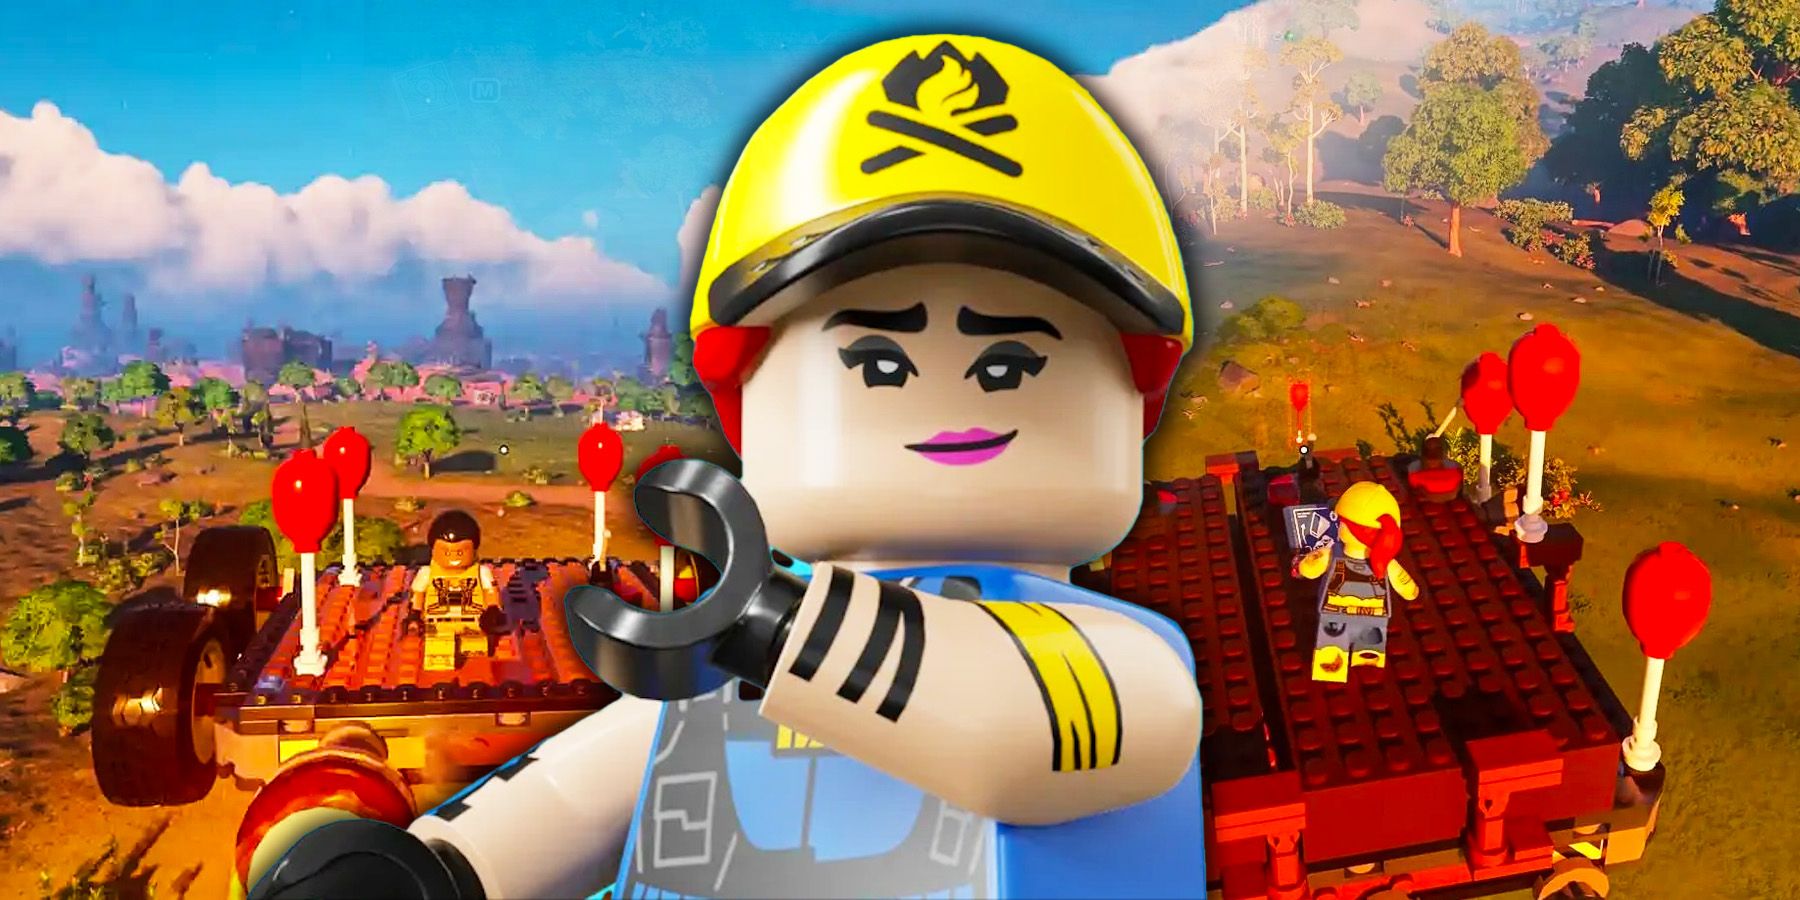 MAKING THE LEGO MOVIE a ROBLOX ACCOUNT 